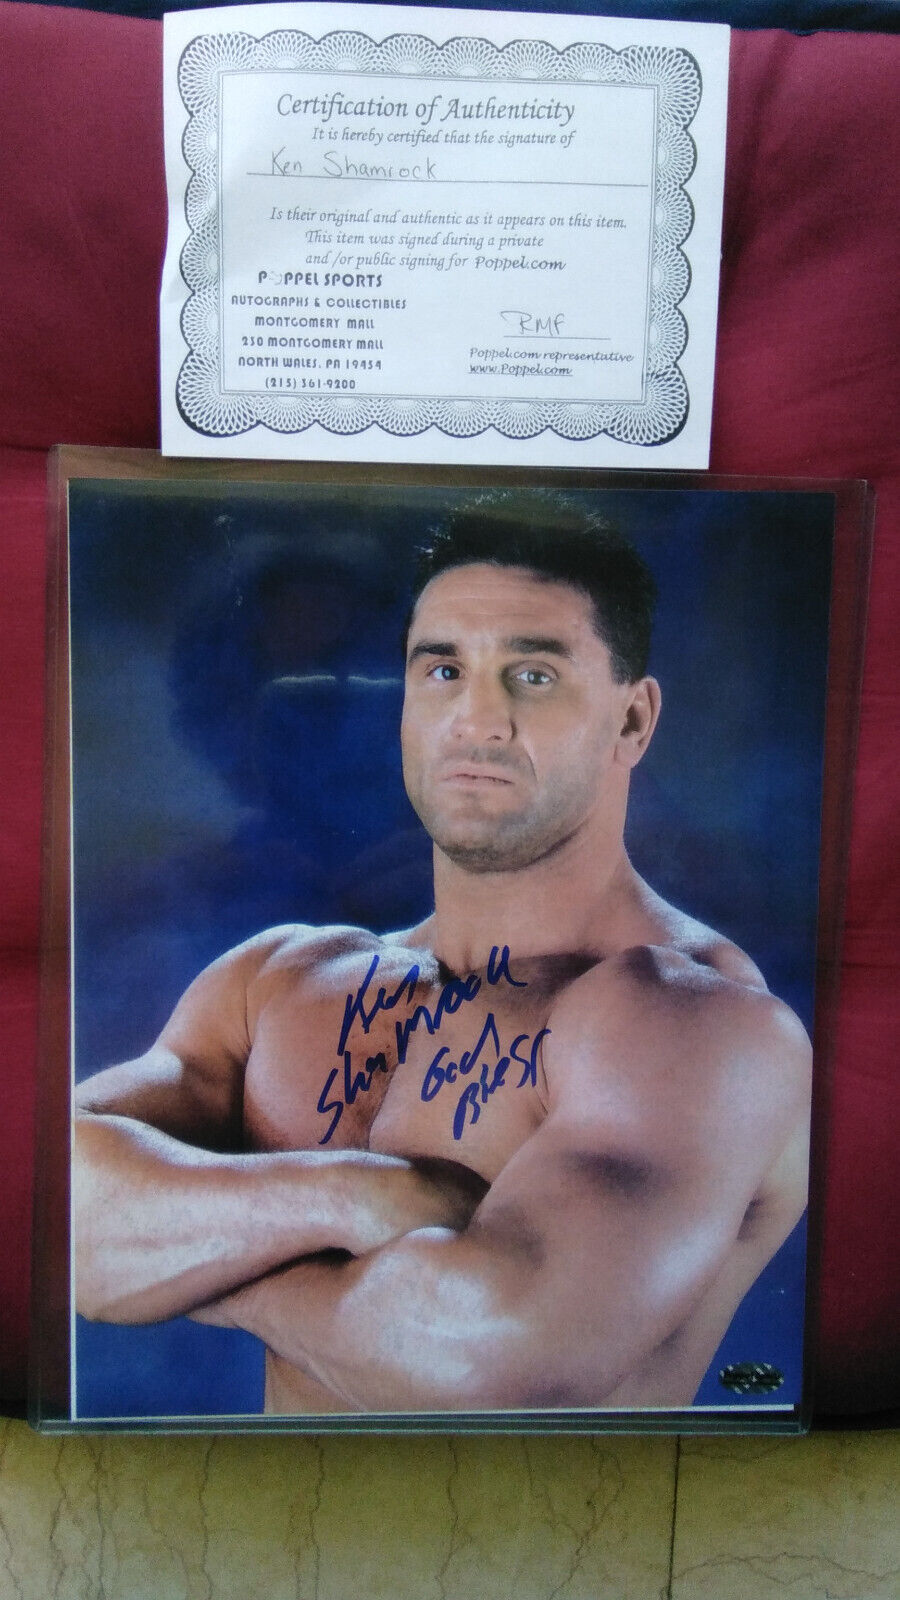 UFC SIGNED KEN SHAMROCK PHOTO WITH CERTIFICATE OF AUTHENTICITY 20X25